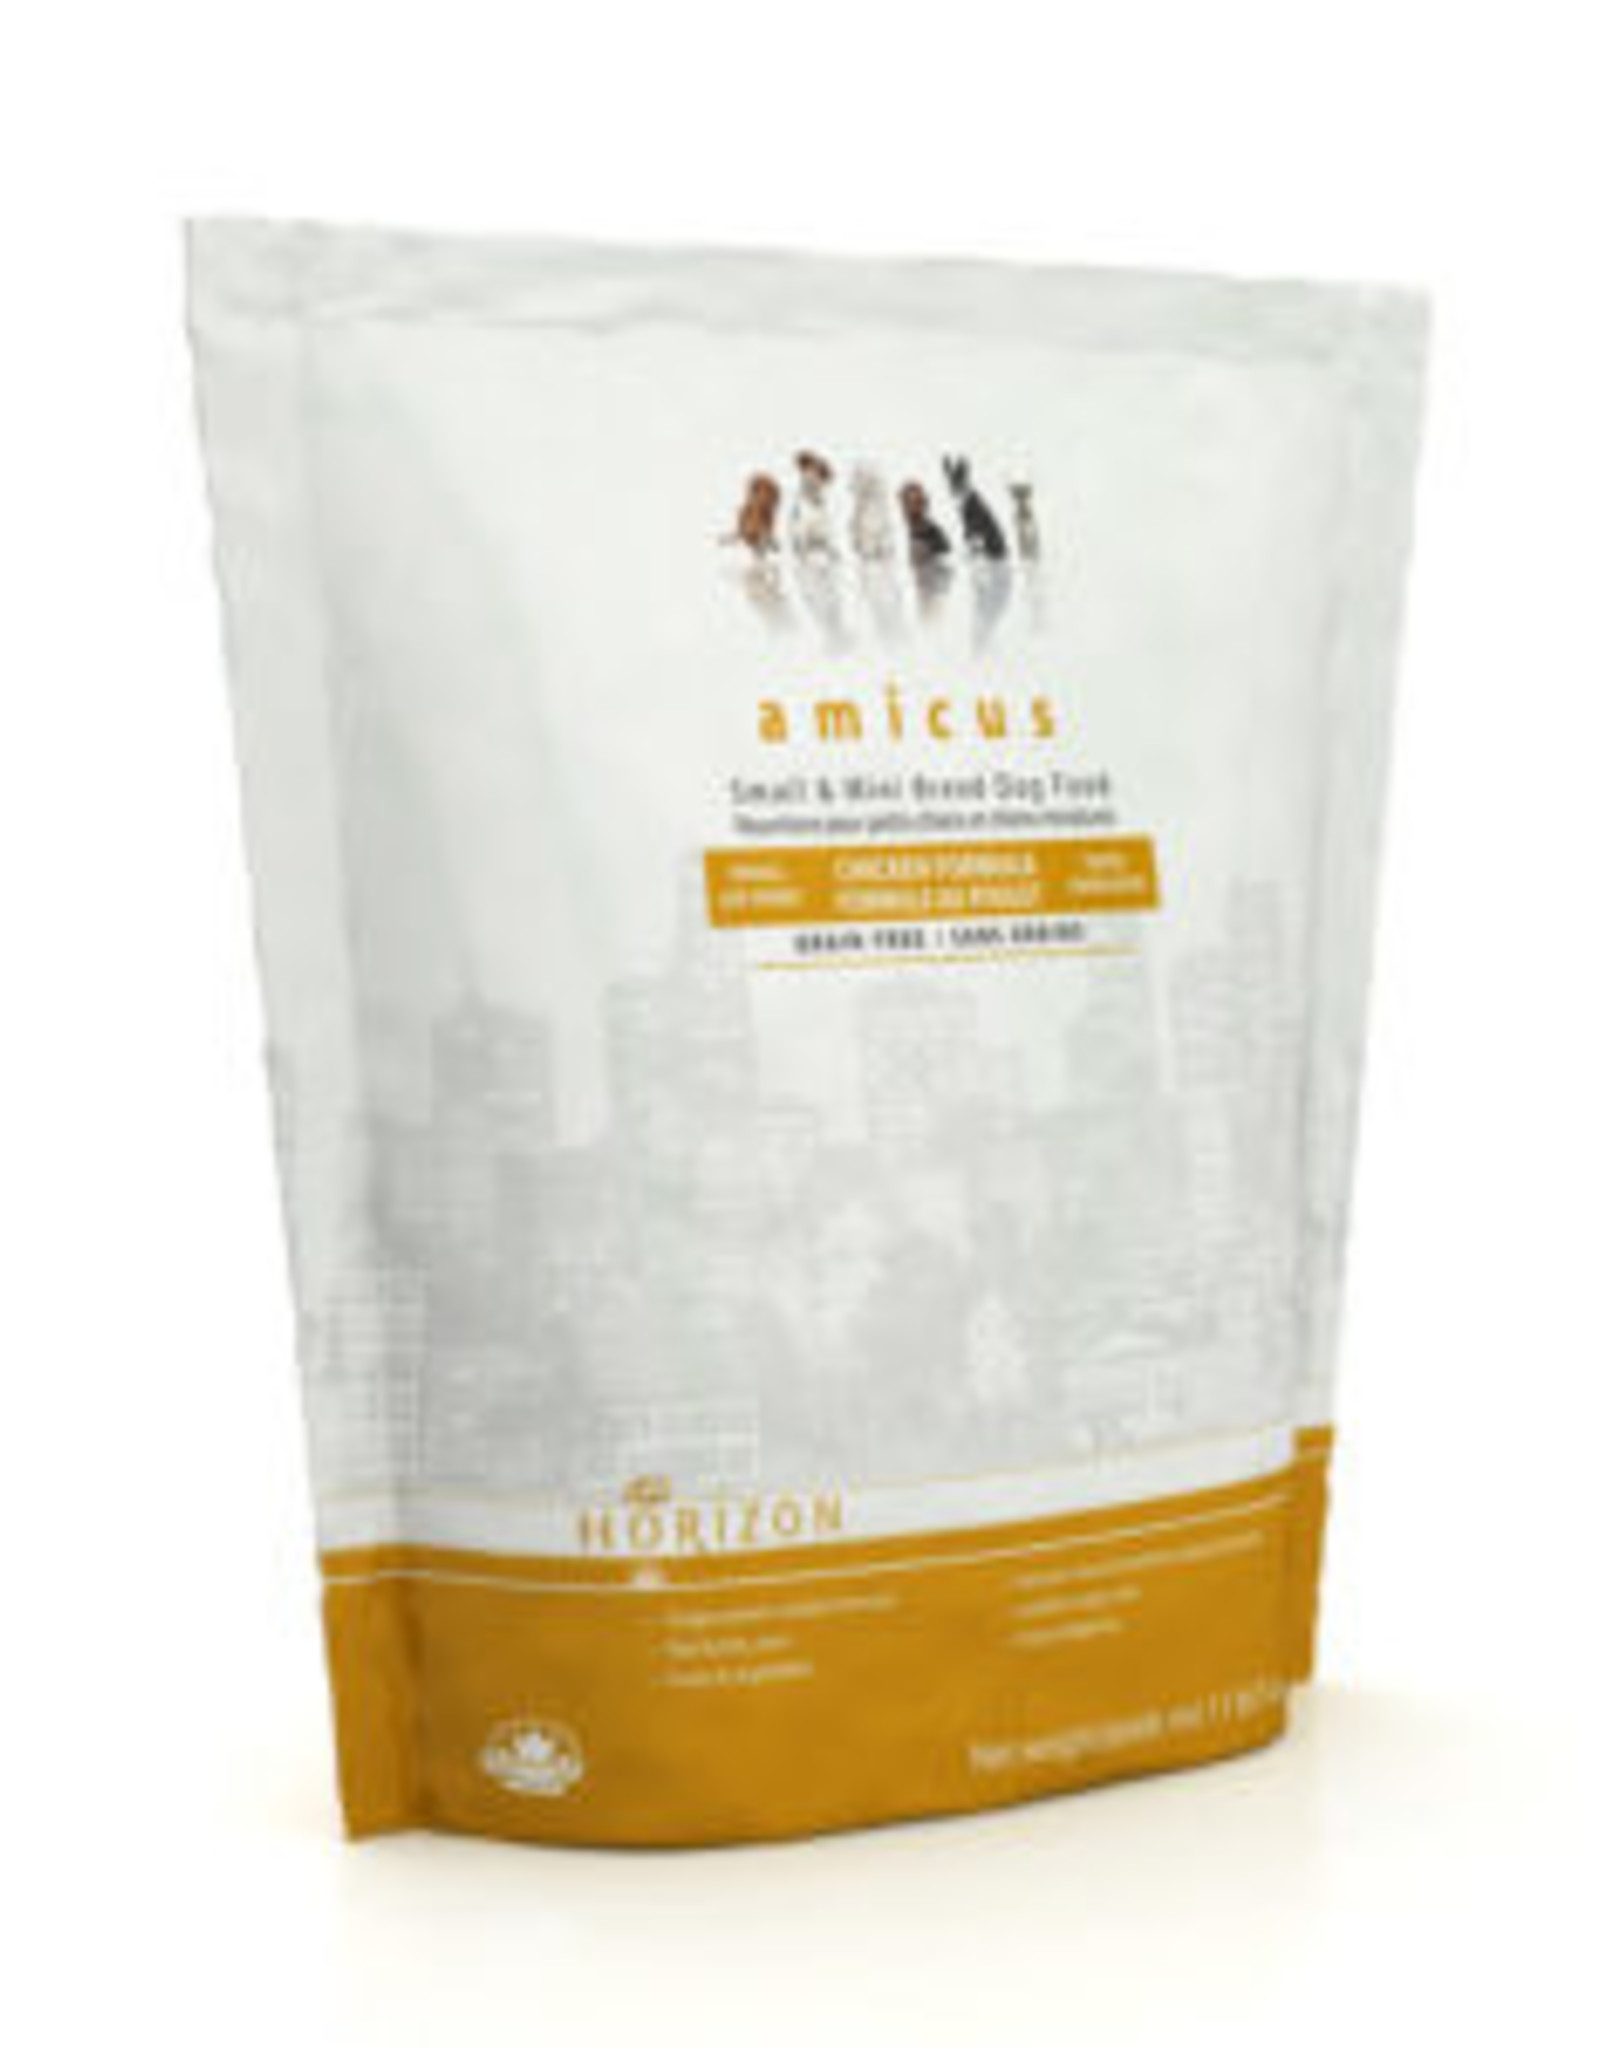 Horizon Horizon Amicus Small Breed All Life Stages Dog Food - Chicken